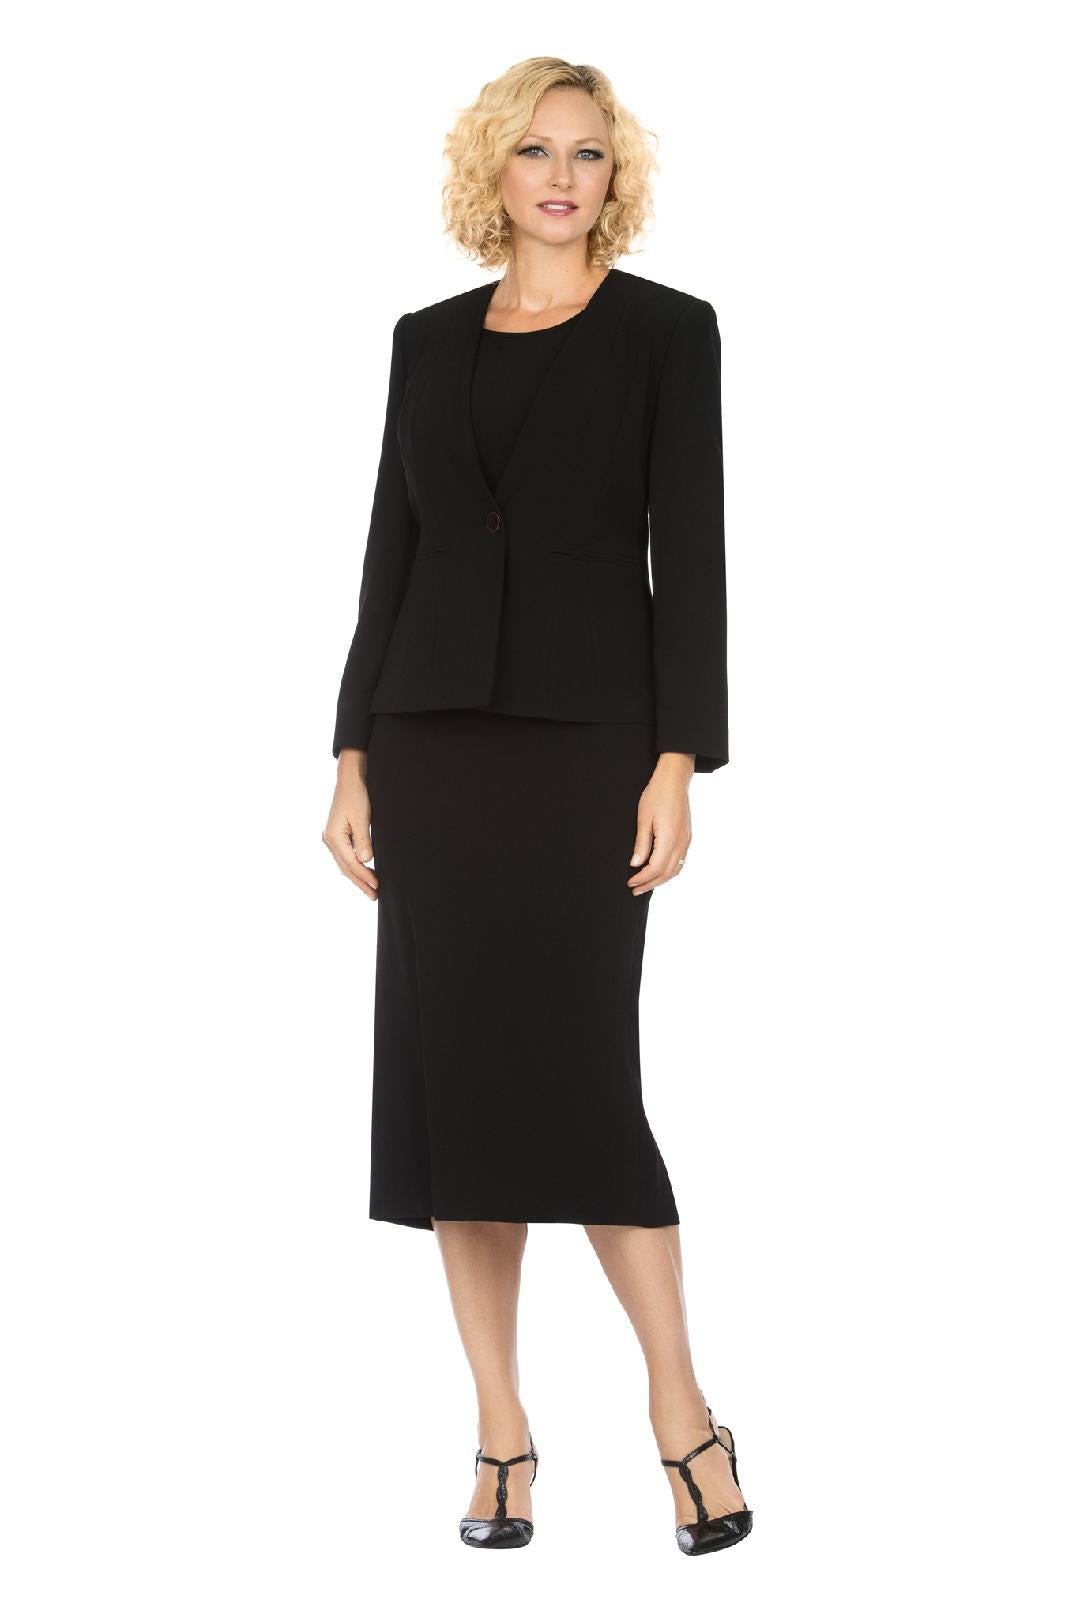 Giovanna Usher Suit S0722-Black - Church Suits For Less